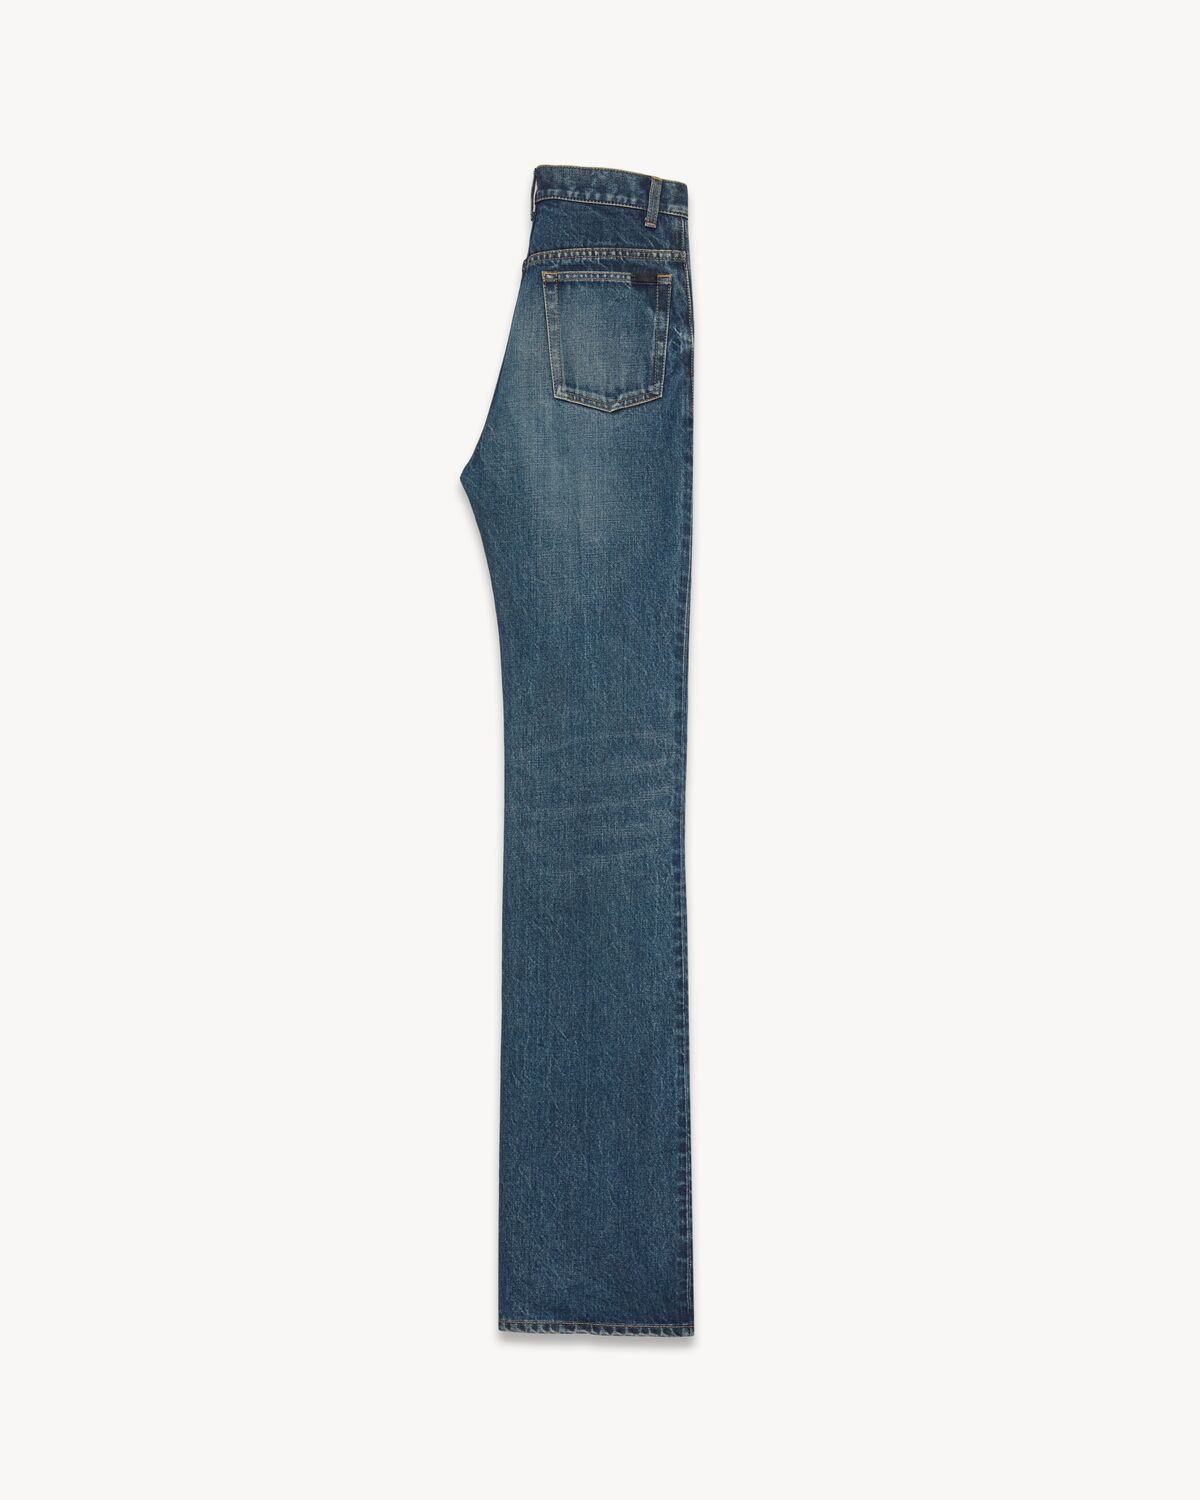 CLYDE jeans in august blue denim